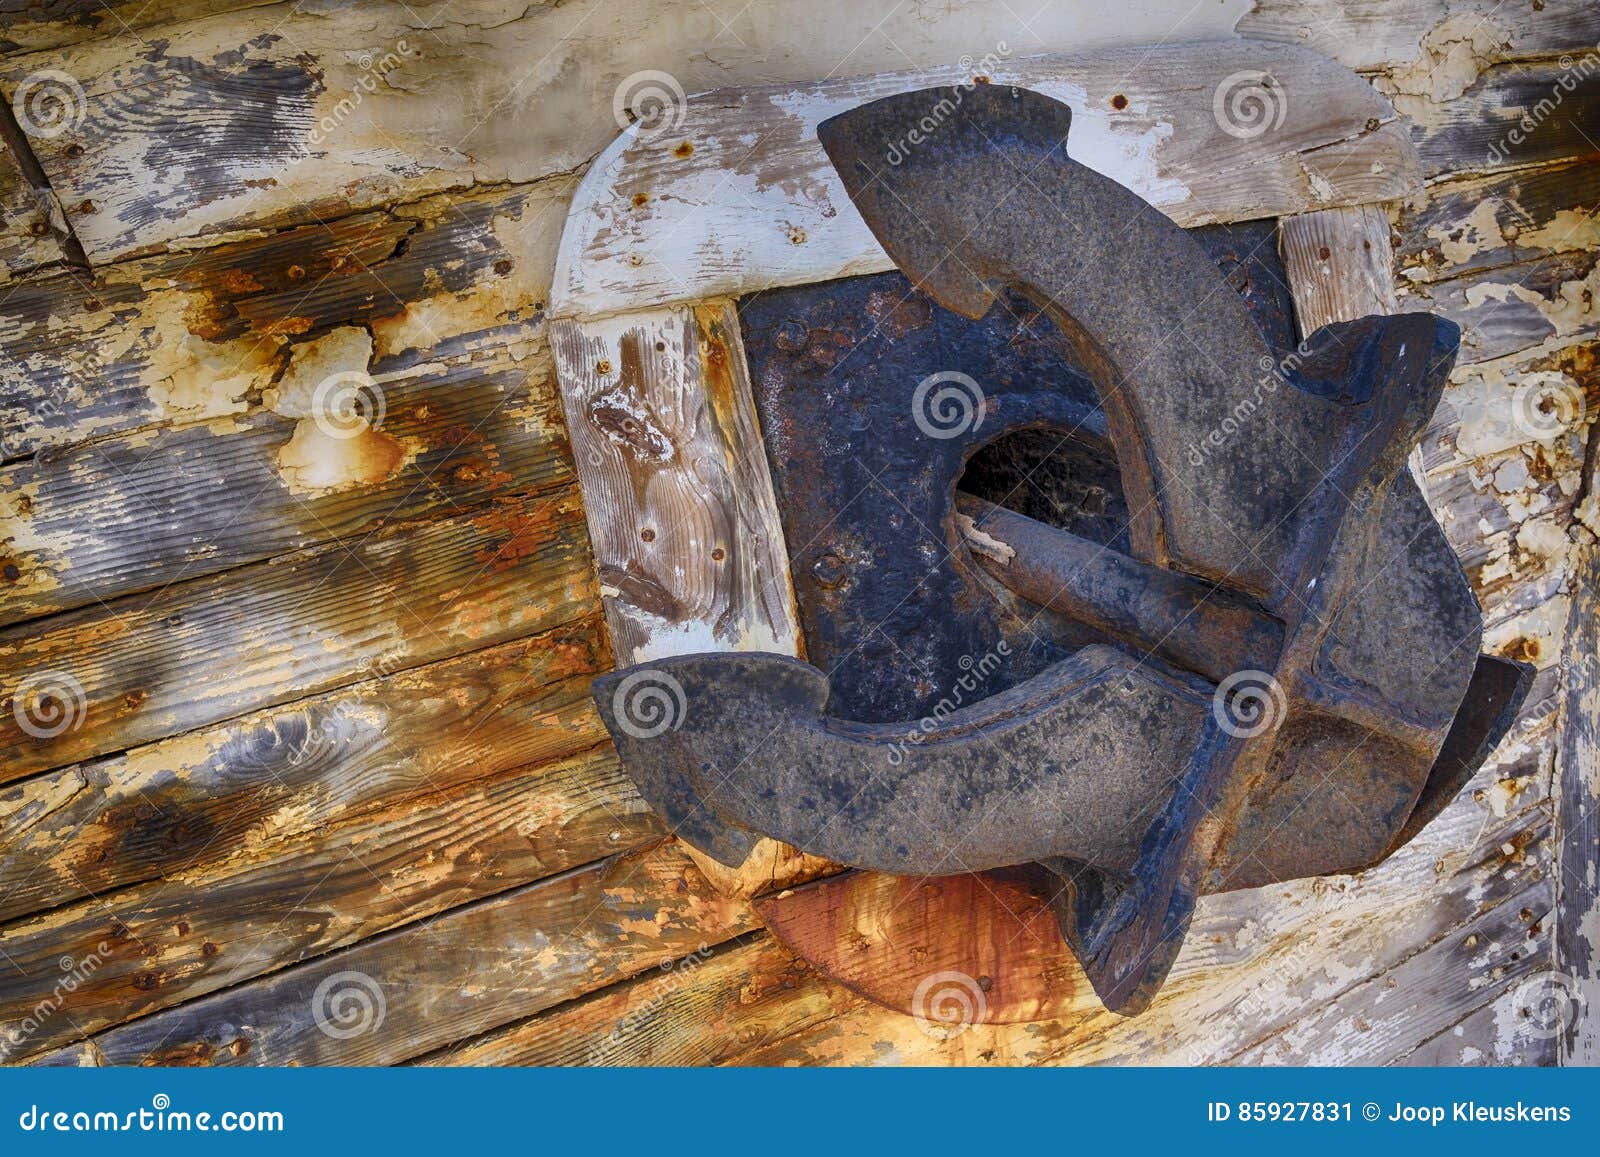 Old rusty boat anchor stock image. Image of transport - 85927831